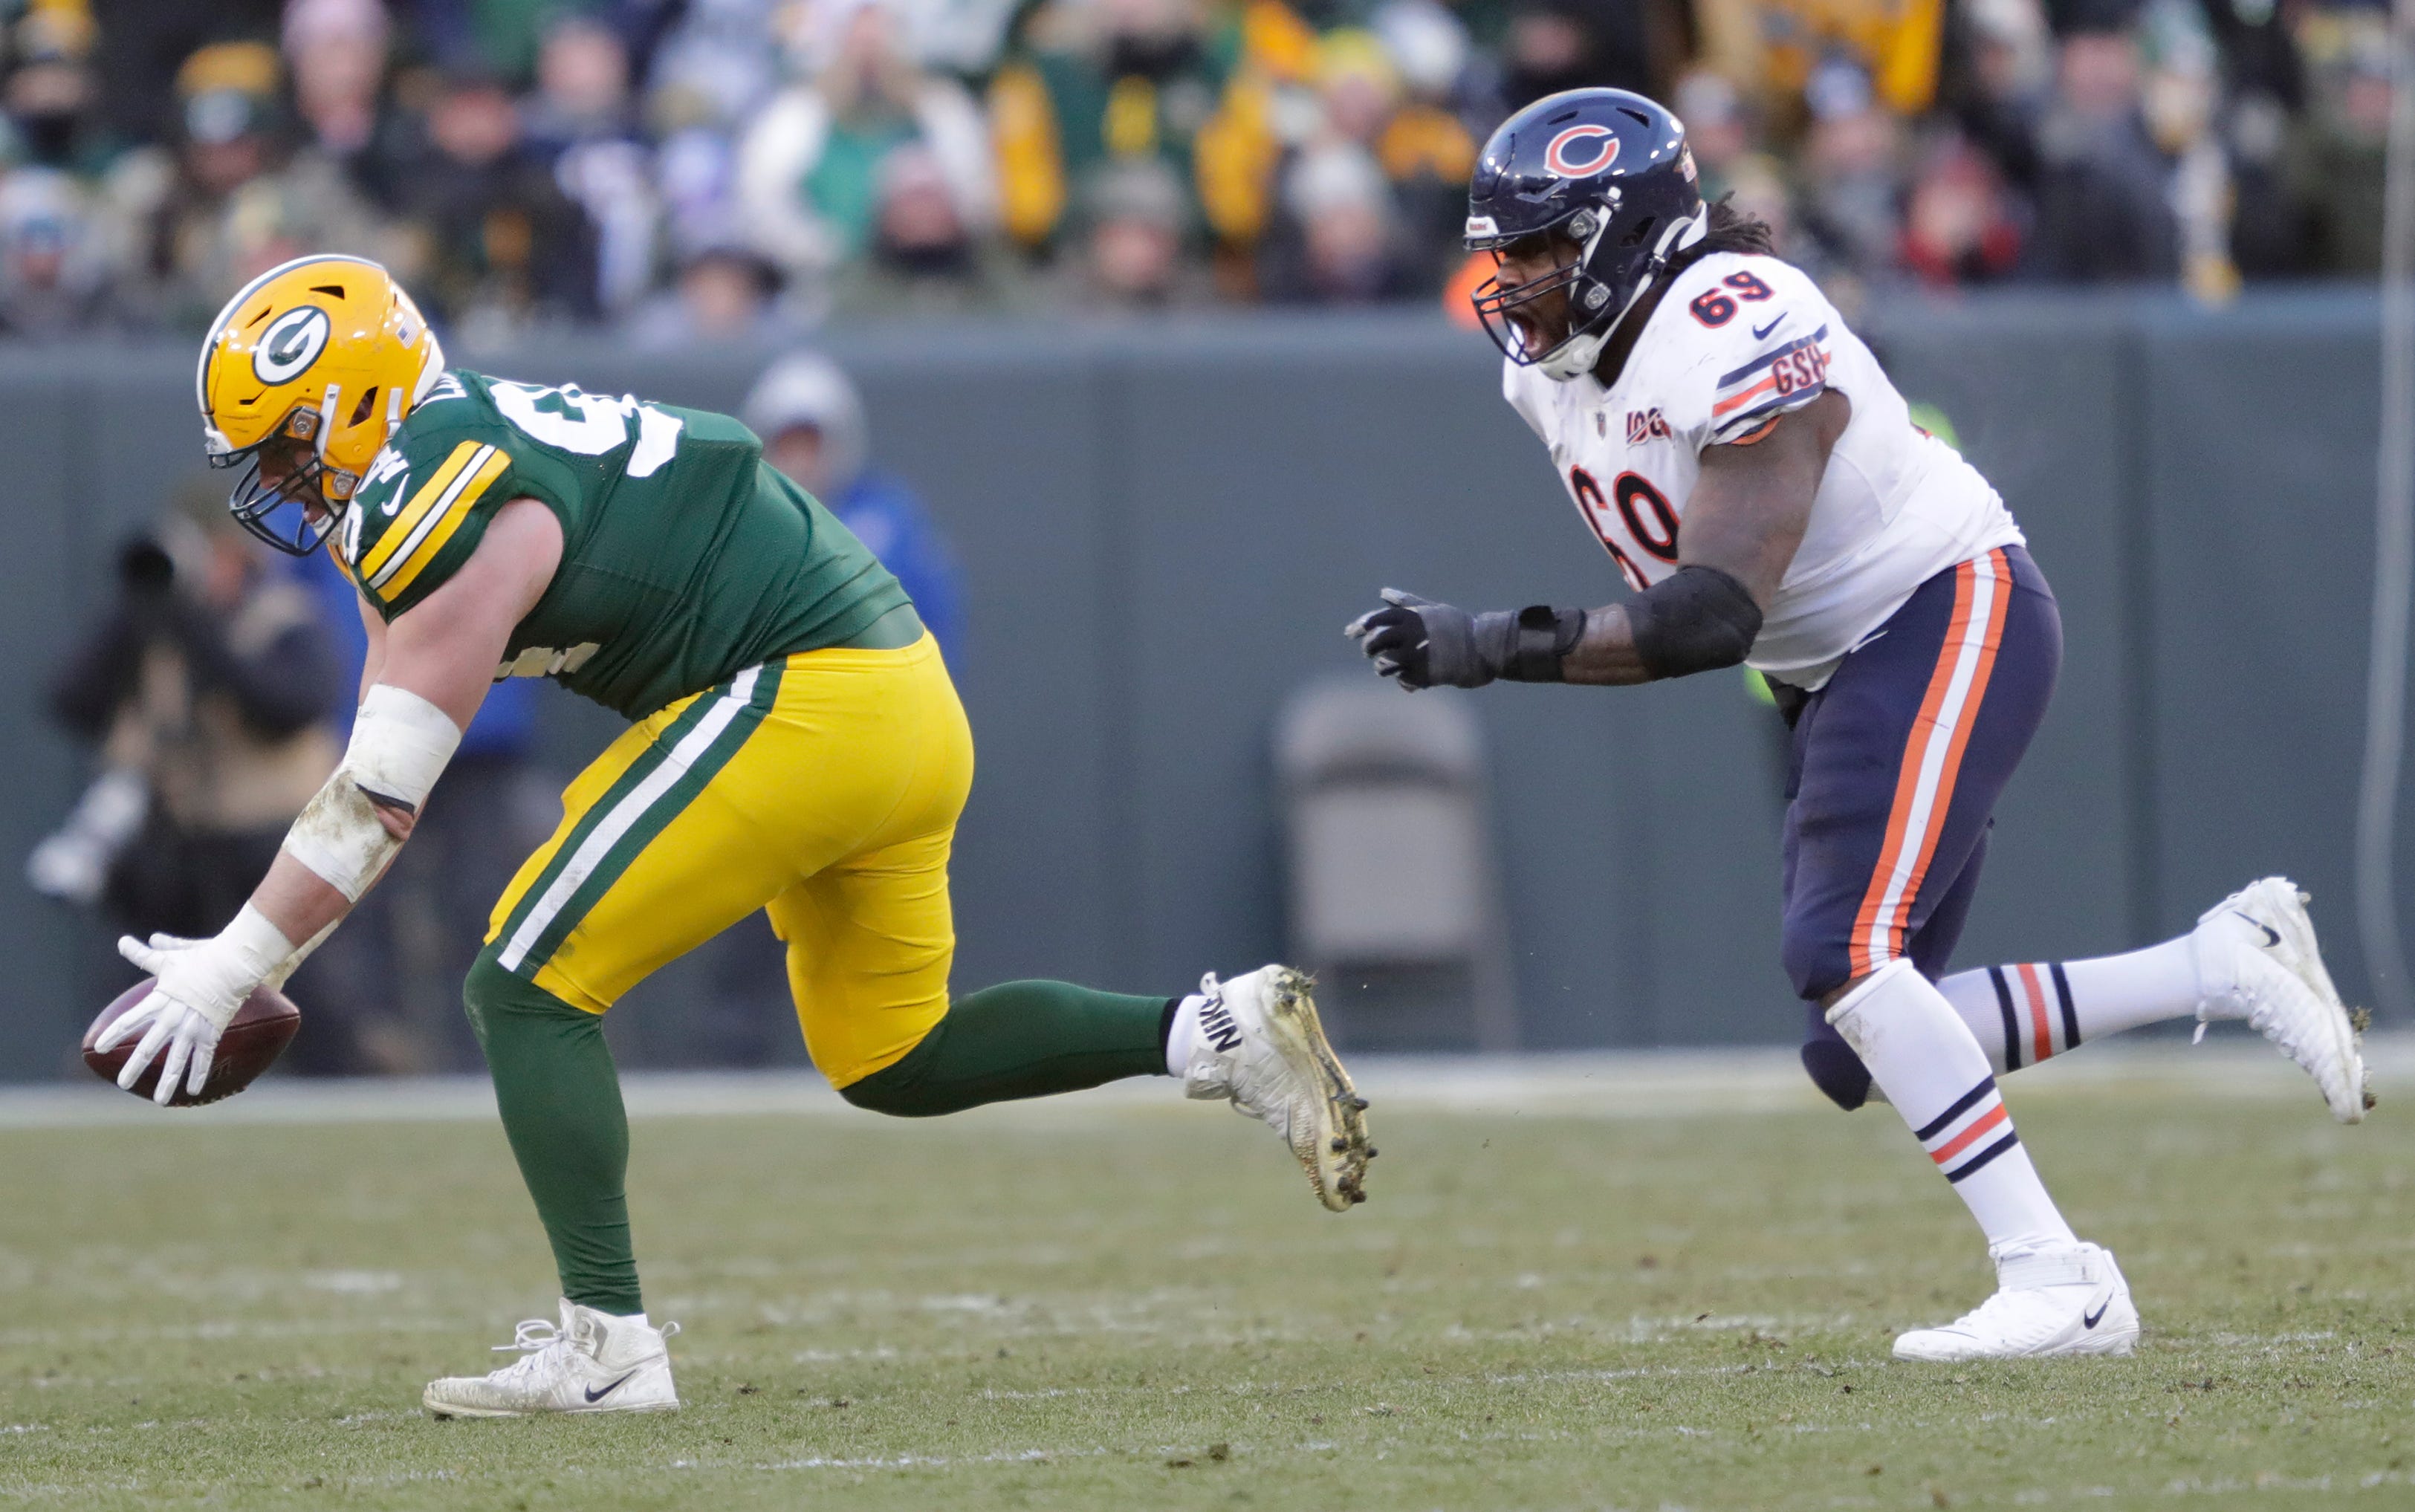 Green Bay Packers defensive end Dean Lowry (94) intercepts a pass against Chicago Bears offensive guard Rashaad Coward (69) in the fourth quarter Sunday, December 15, 2019, at Lambeau Field in Green Bay, Wis.